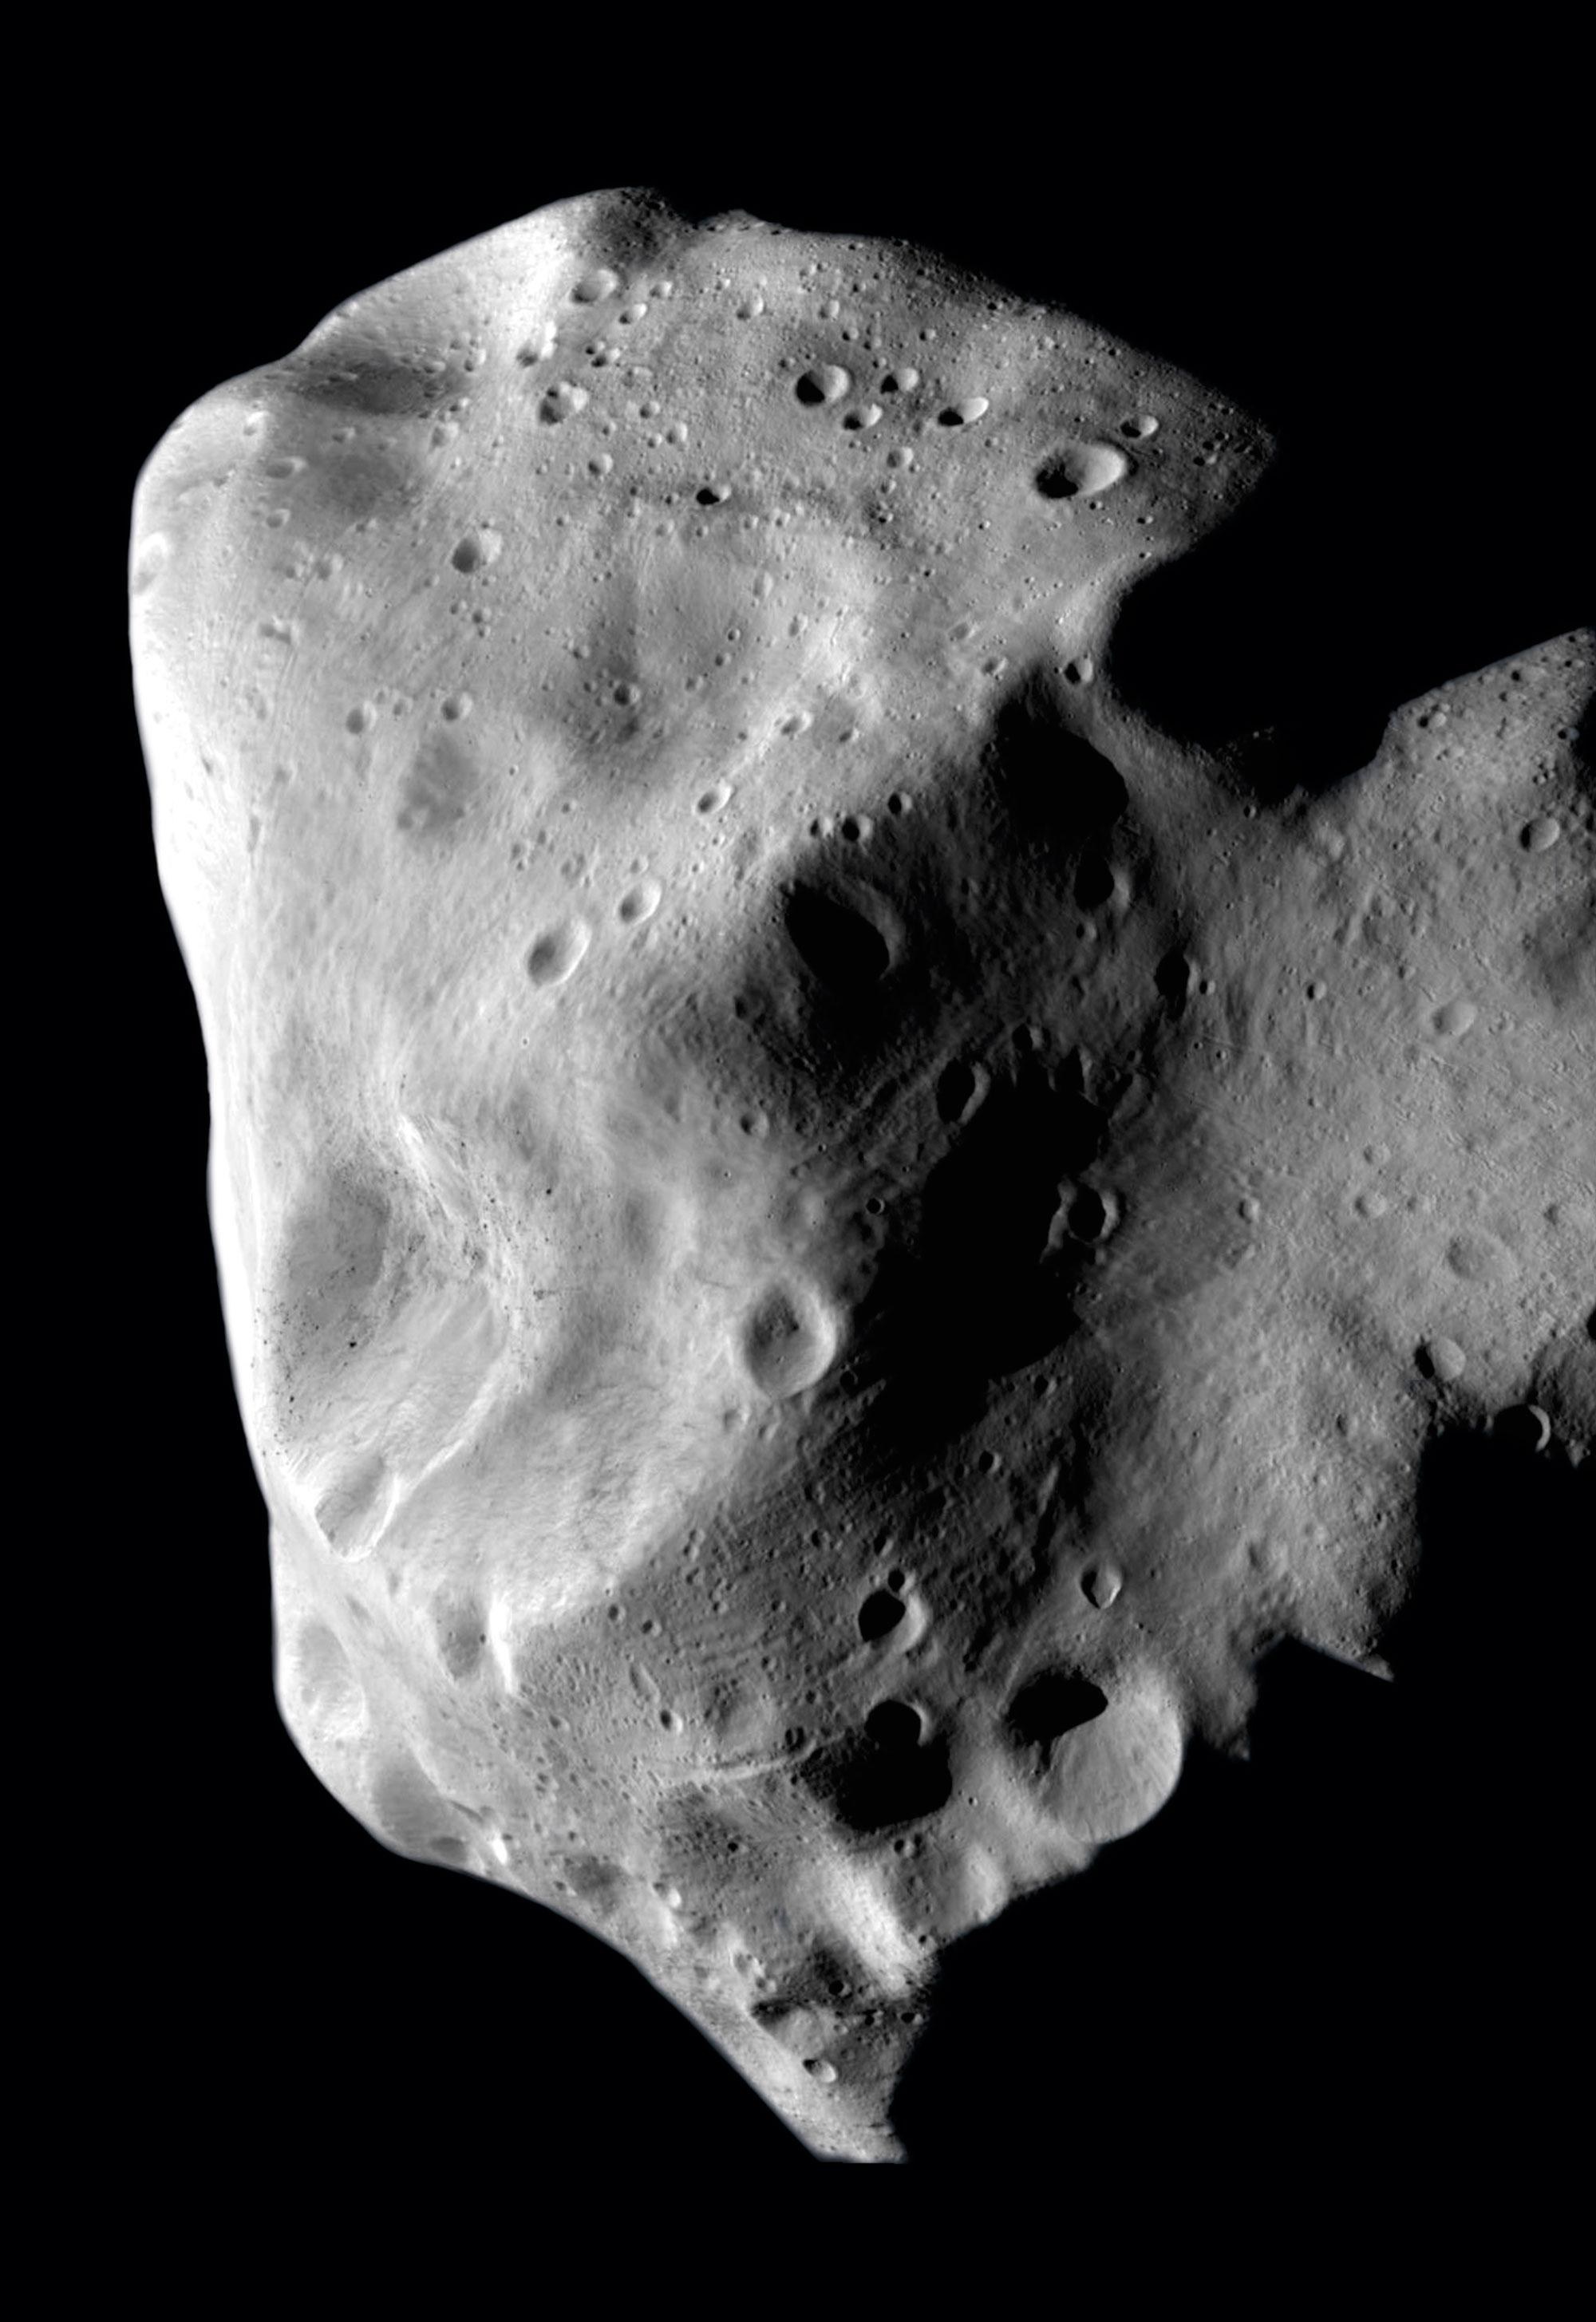 Rosetta passed the asteroid Lutetia at a distance of approximately 3000 kilometres